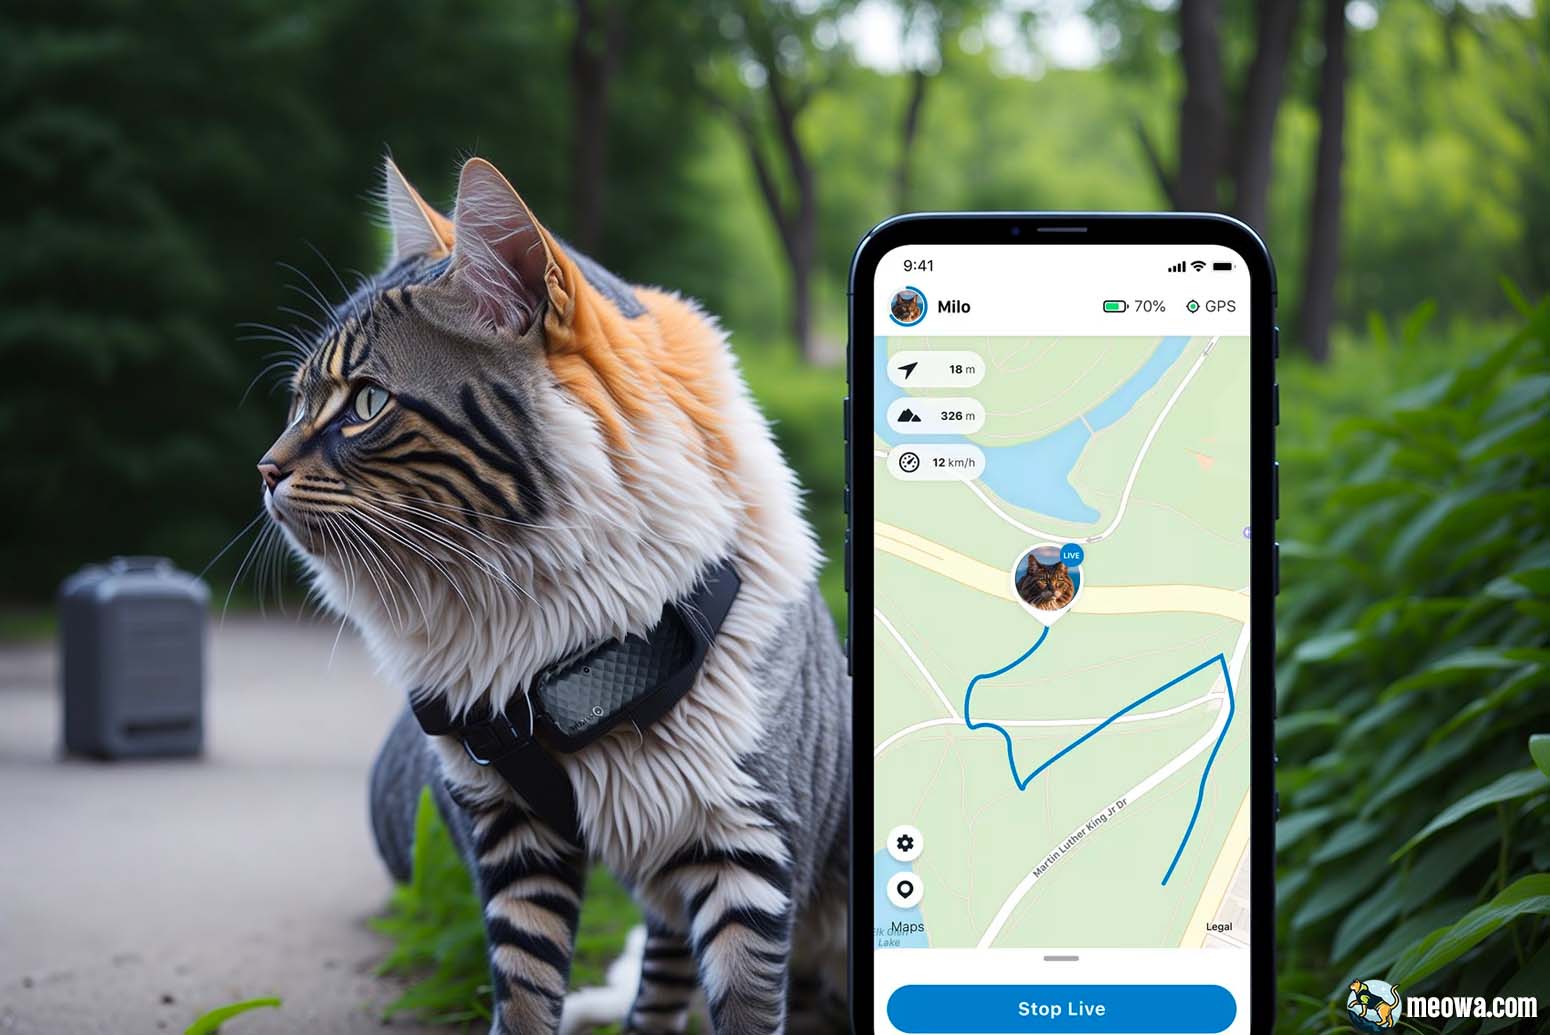 Tractive GPS Cat GPS Tracker For Cats 